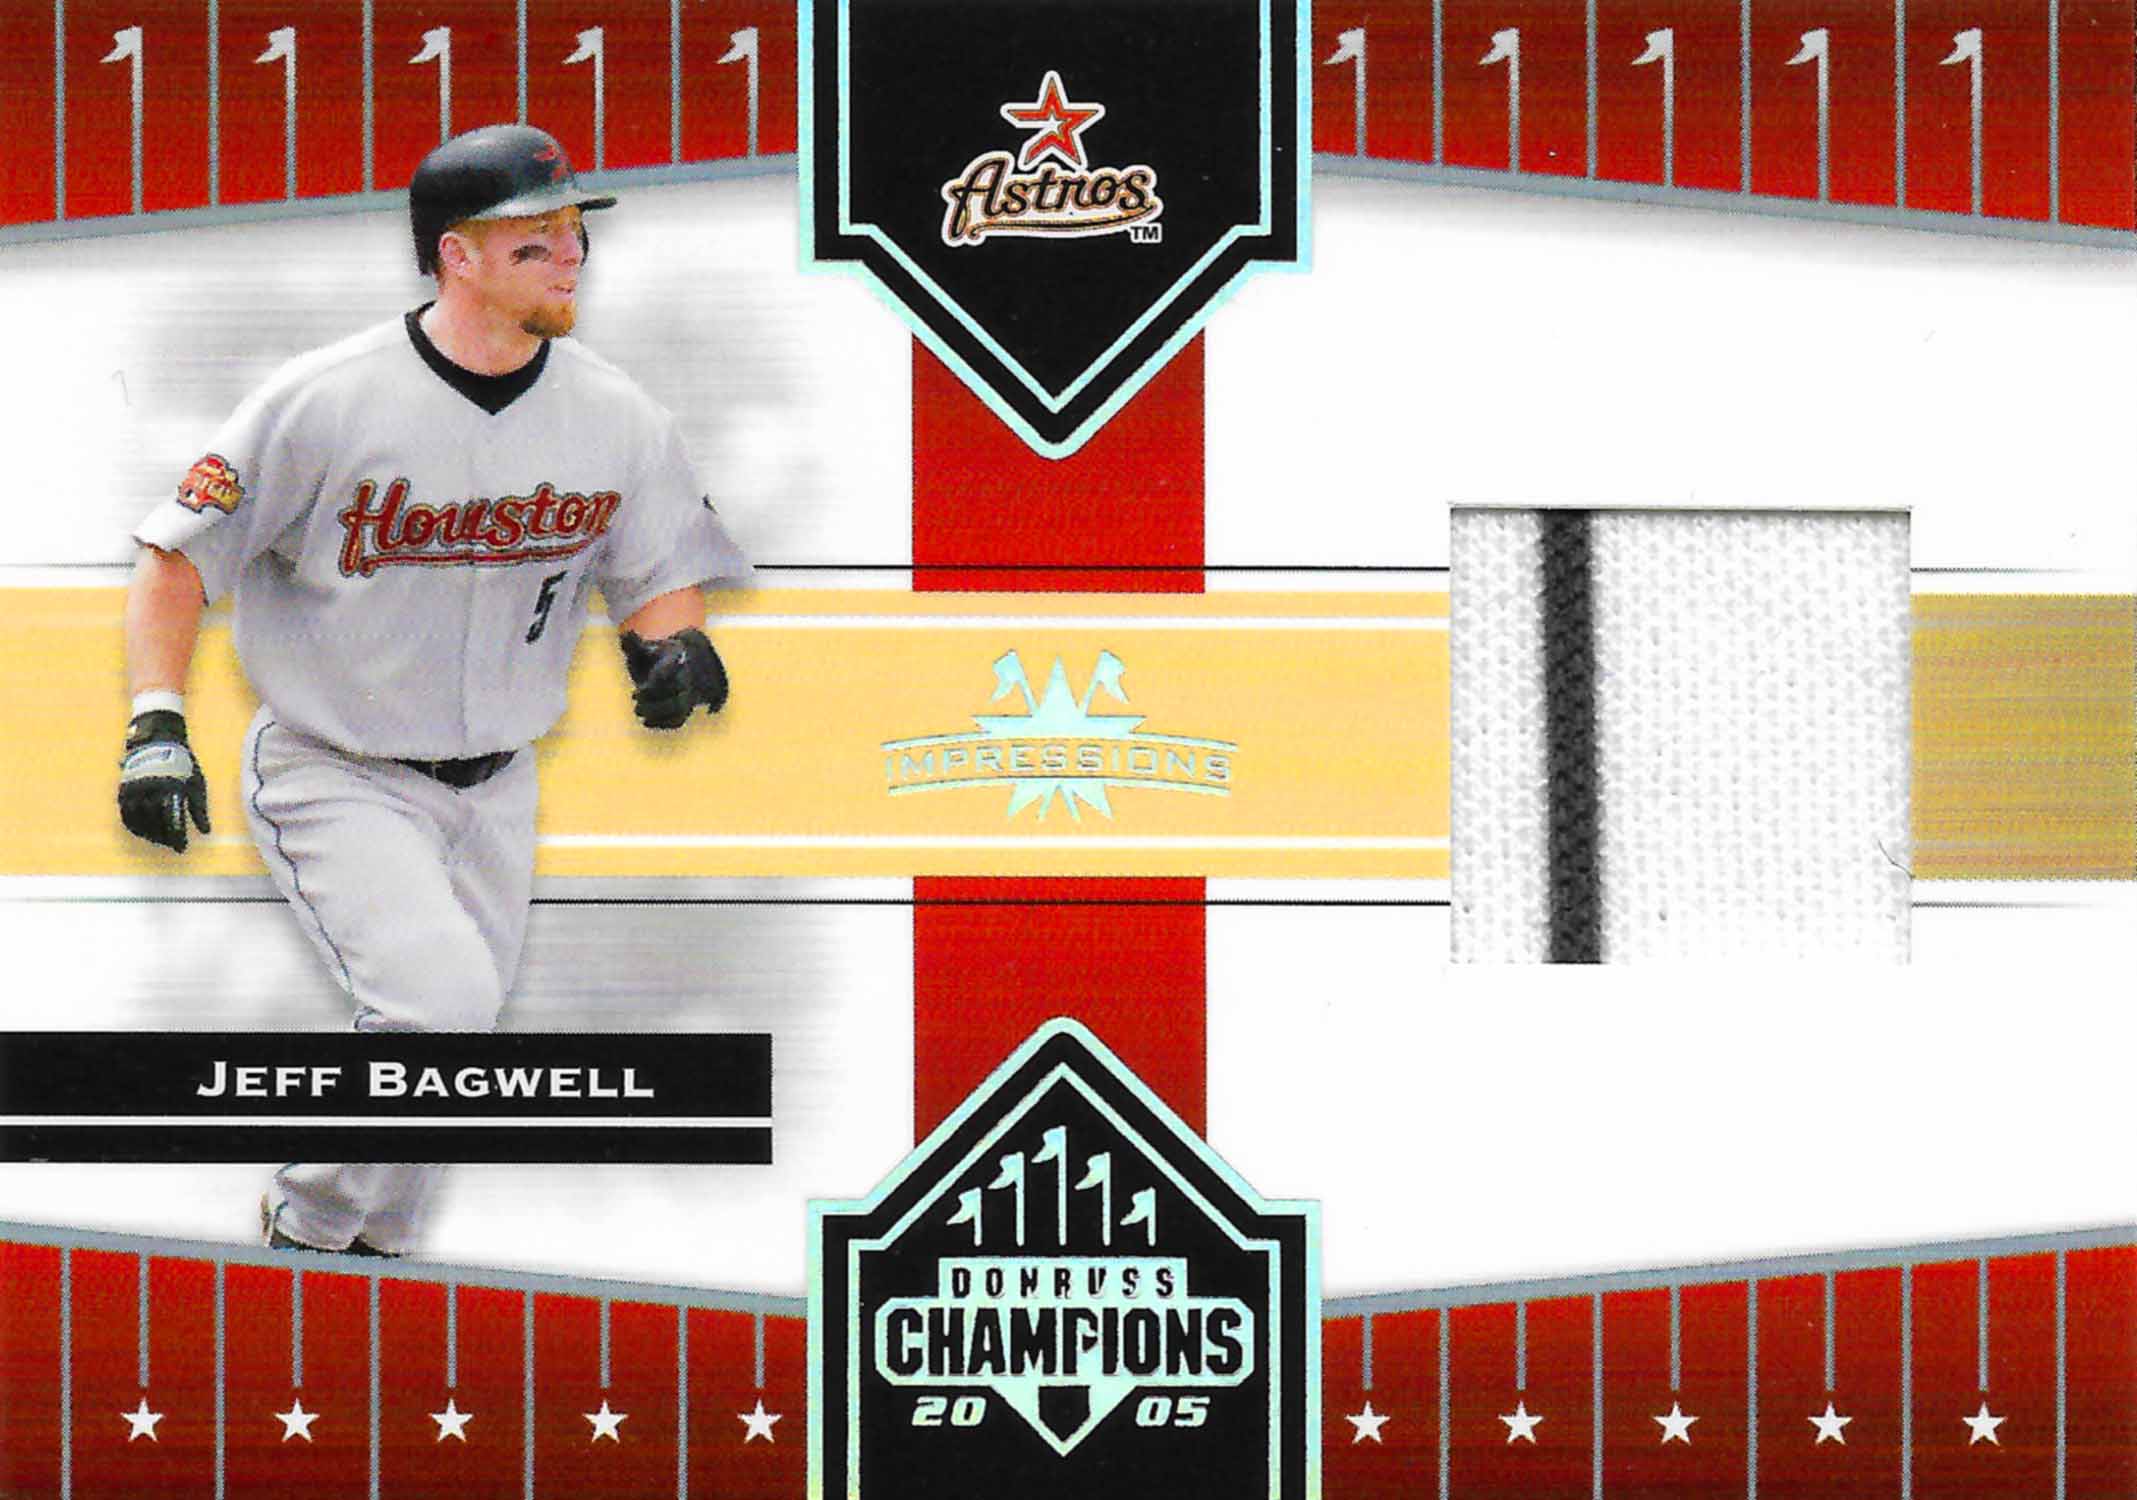 2005 Donruss Champions Impressions Material Jersey